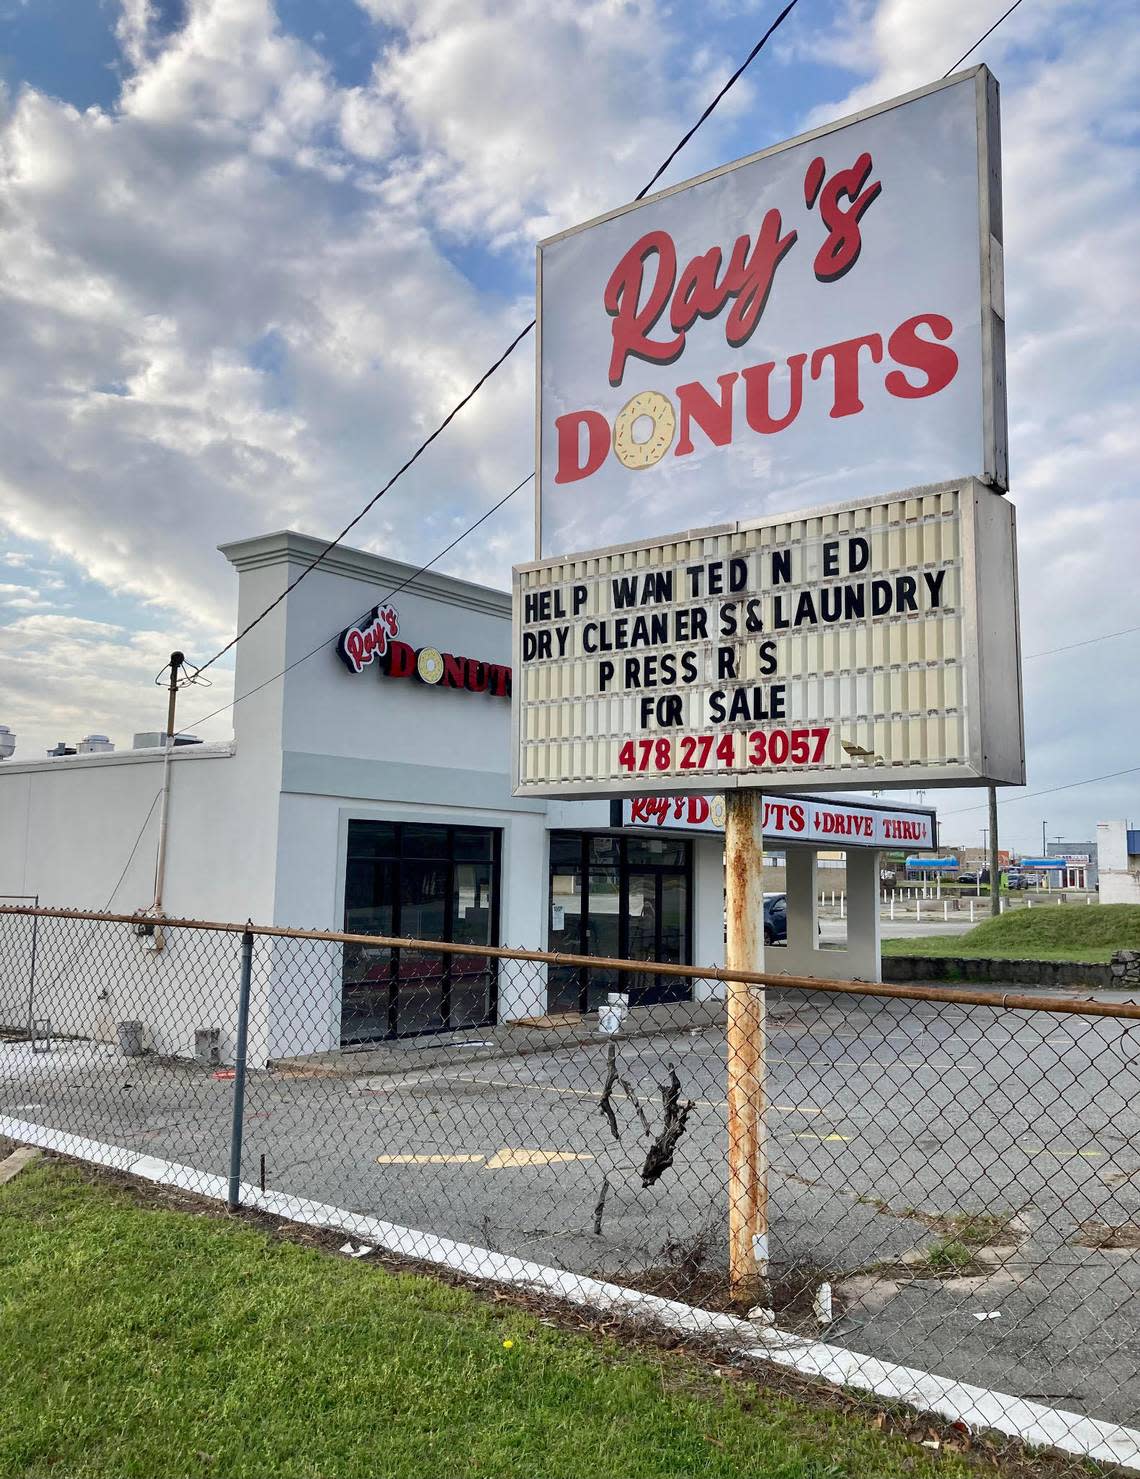 The former Keen’s Cleaners location at 405 North Houston Road in Warner Robins is undergoing a remodel to be transformed into Ray’s Donuts.